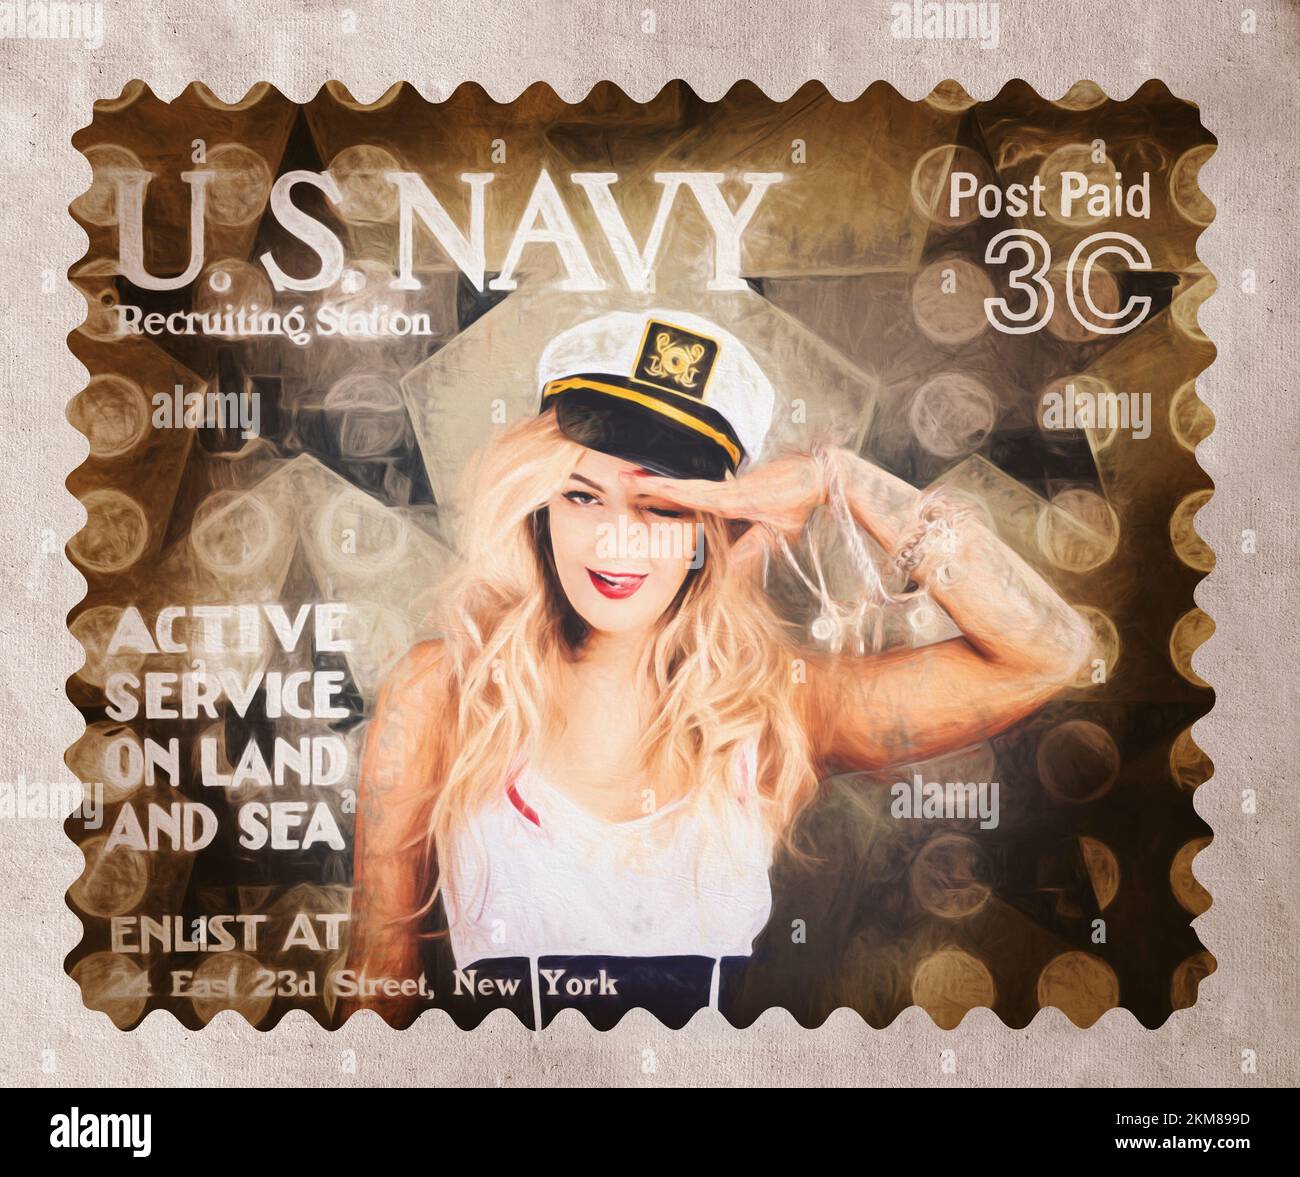 Creative fine art illustration - United States ww1 recruitment postage stamp of a navy sailor girl saluting at an enlisting station. Posted pin-ups Stock Photo